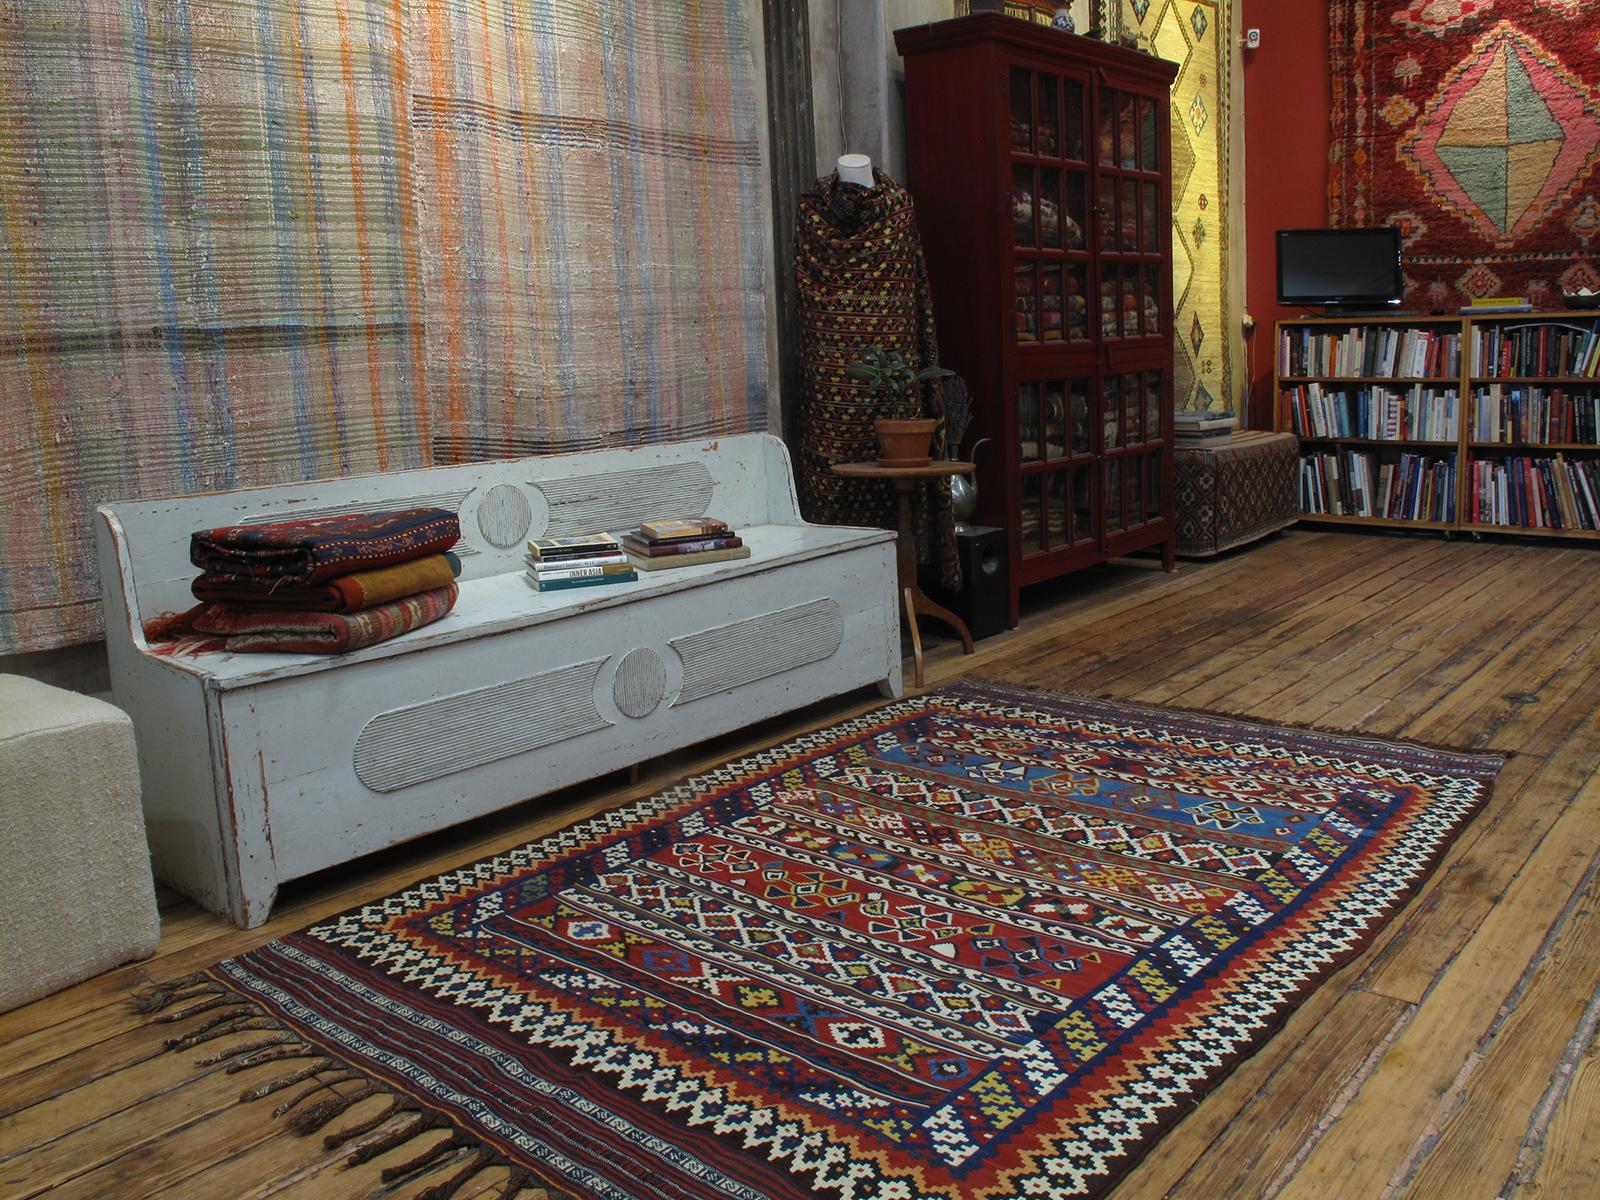 A beautiful antique kilim from Southwestern Iran, attributed to the Lori tribes, displaying one of their classic designs in a lively color palette of natural dyes. In remarkable state of preservation, retaining its original finishes all around.